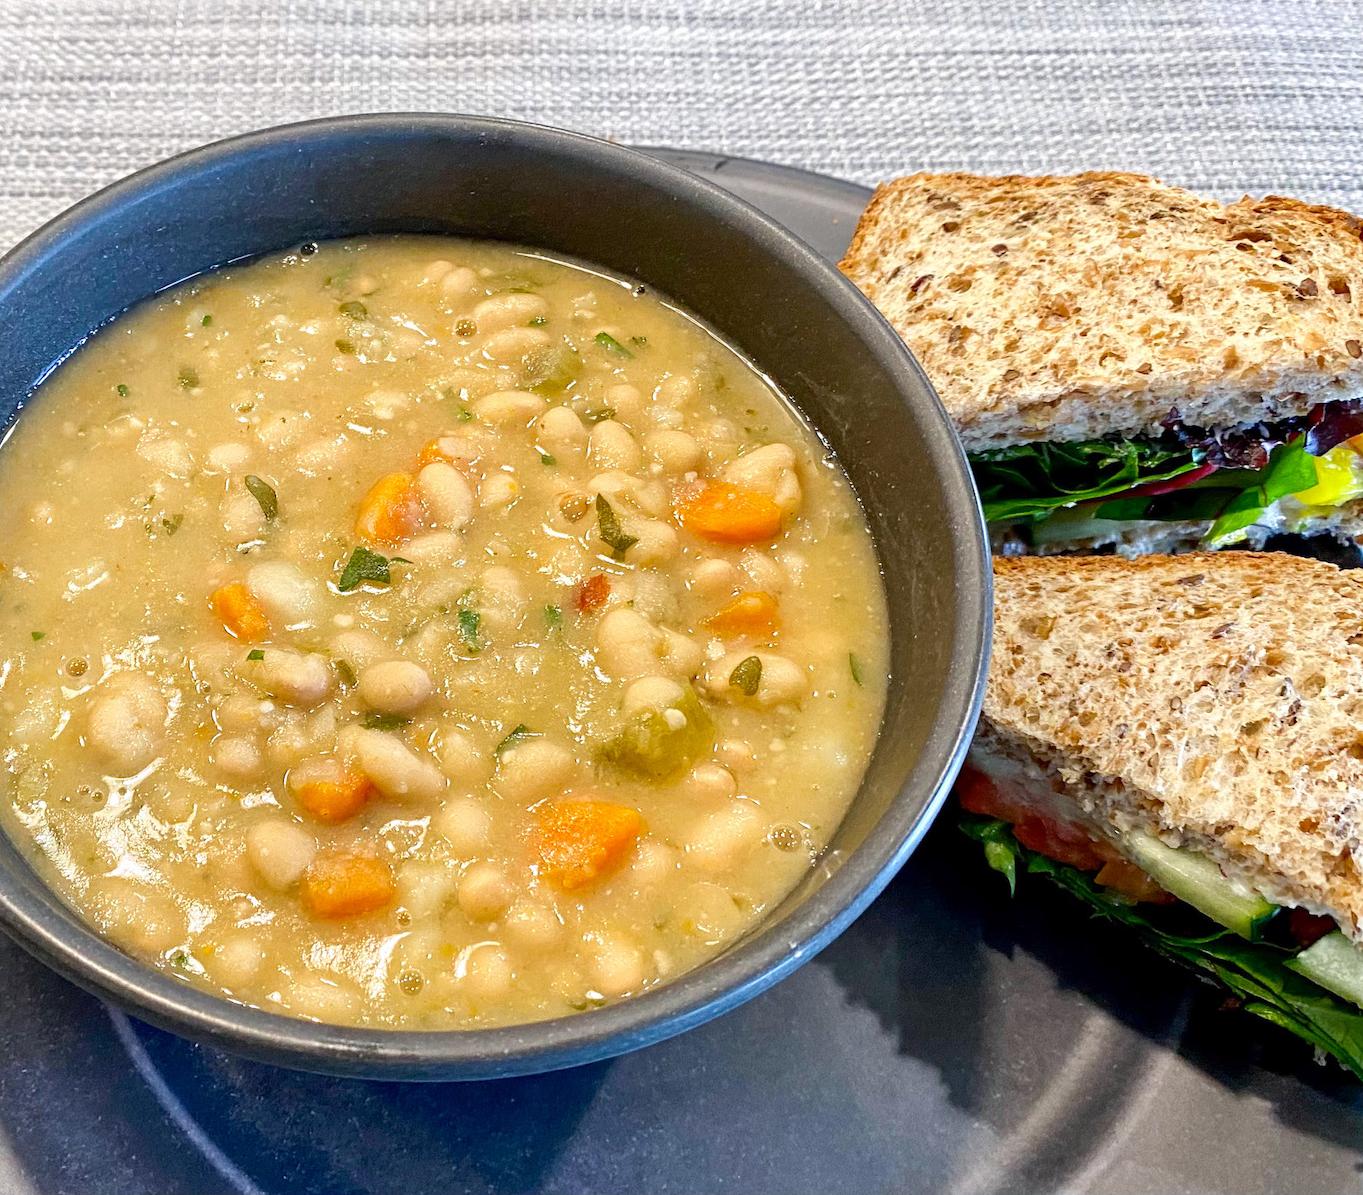  Creamy, comforting and packed with plant-based protein: Navy bean soup has it all.